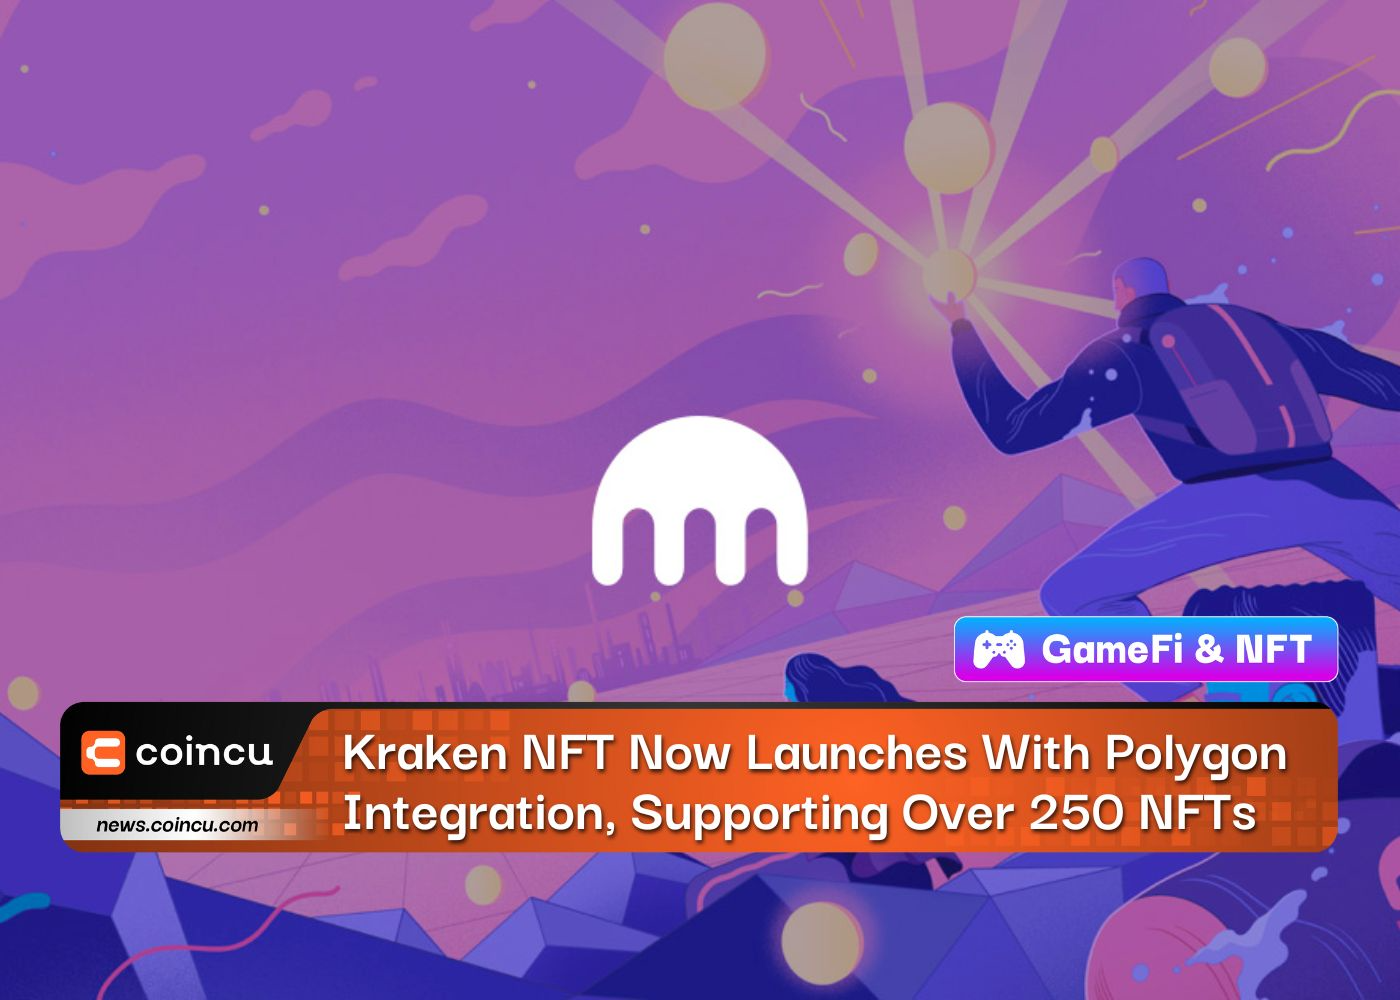 Kraken NFT Now Launches With Polygon Integration, Supporting Over 250 NFTs